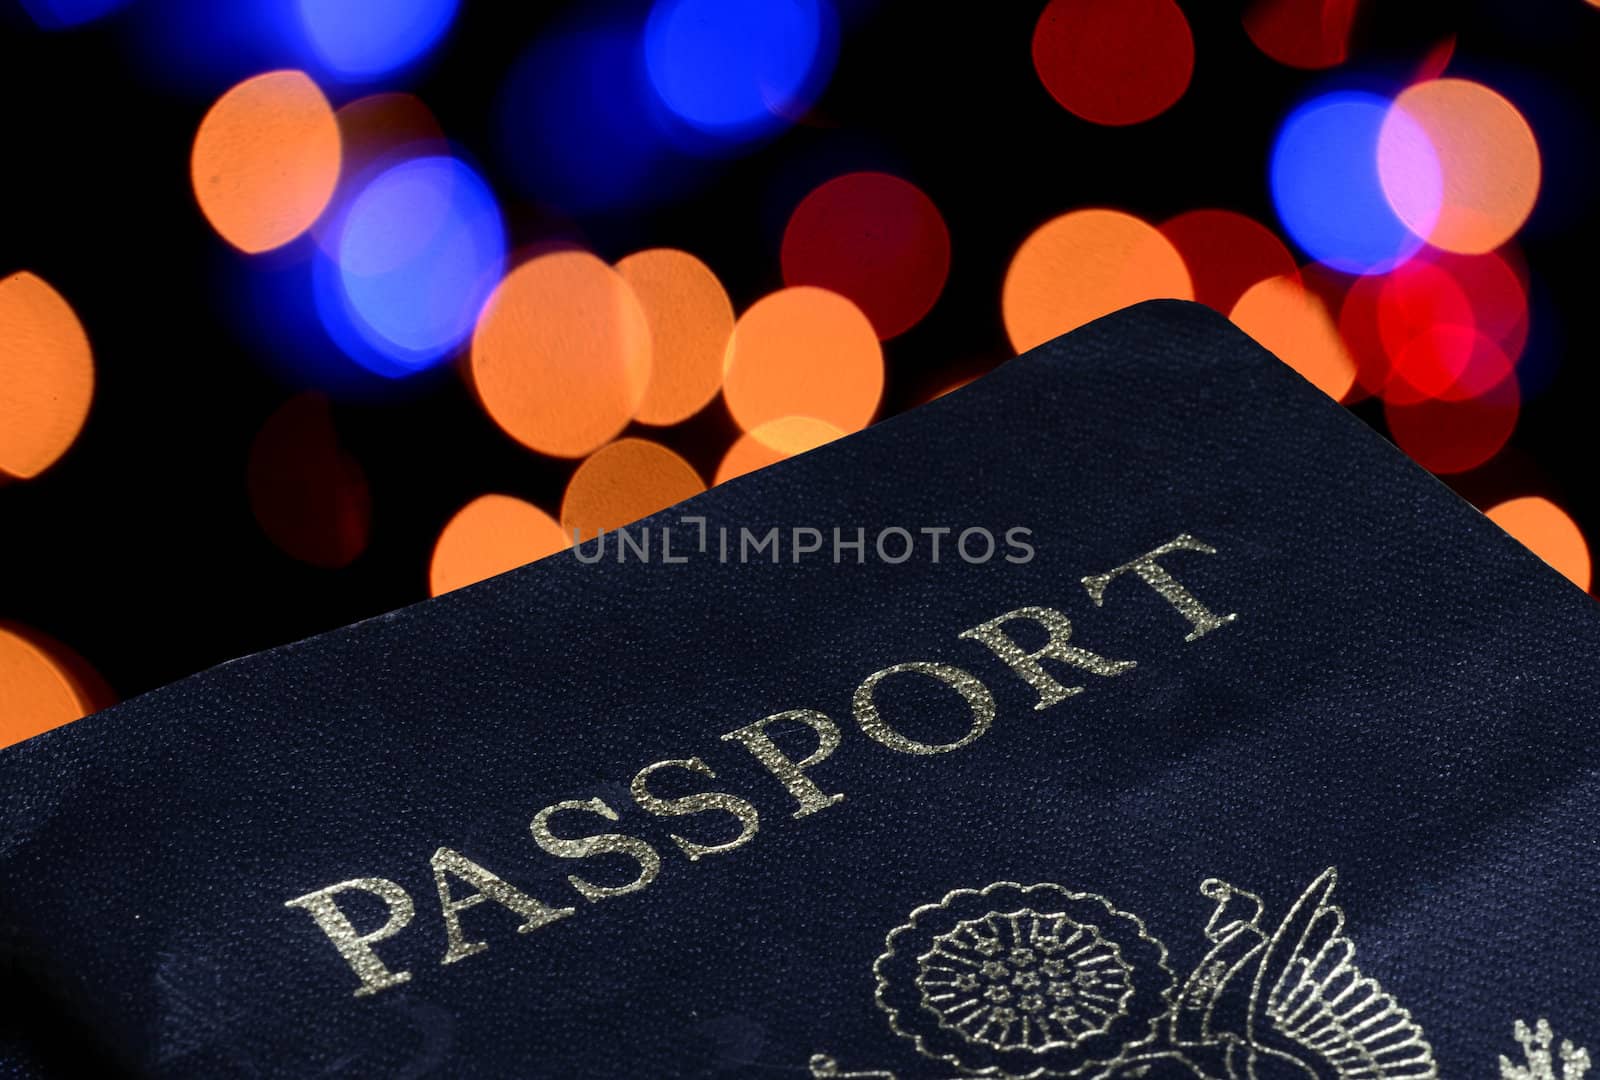 passport on abstract light background by ftlaudgirl